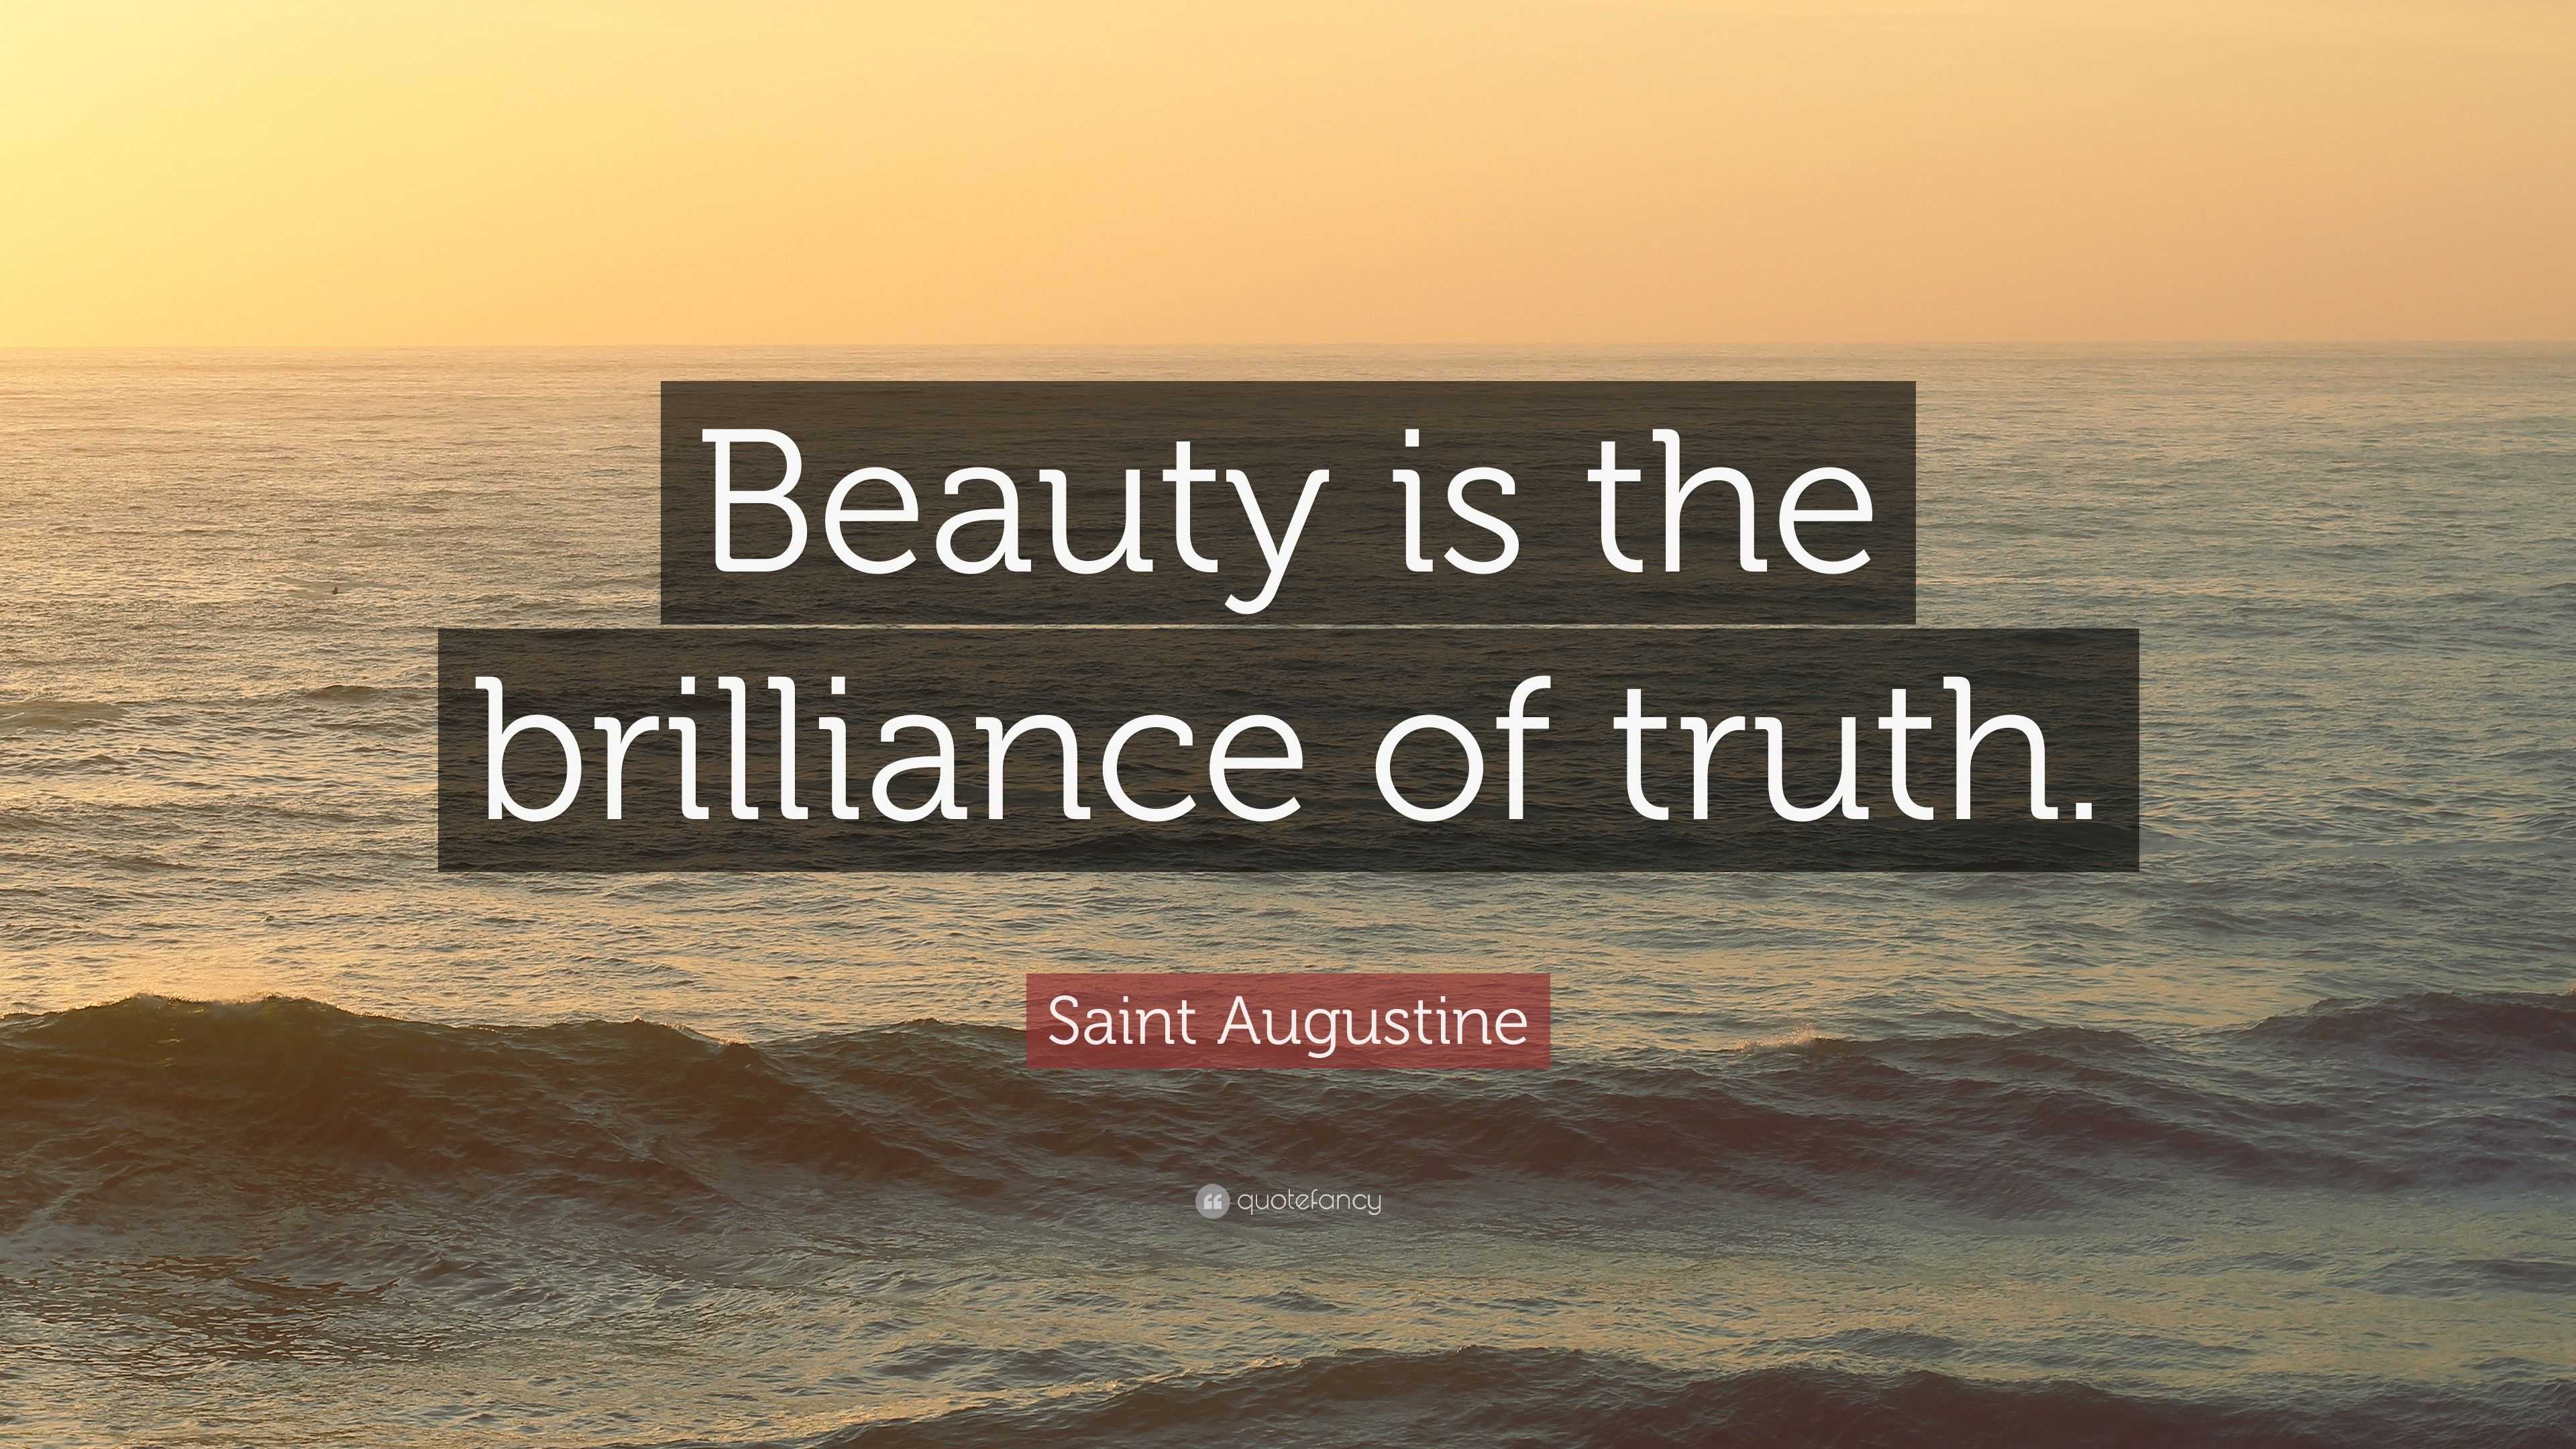 Saint Augustine Quote: "Beauty is the brilliance of truth ...